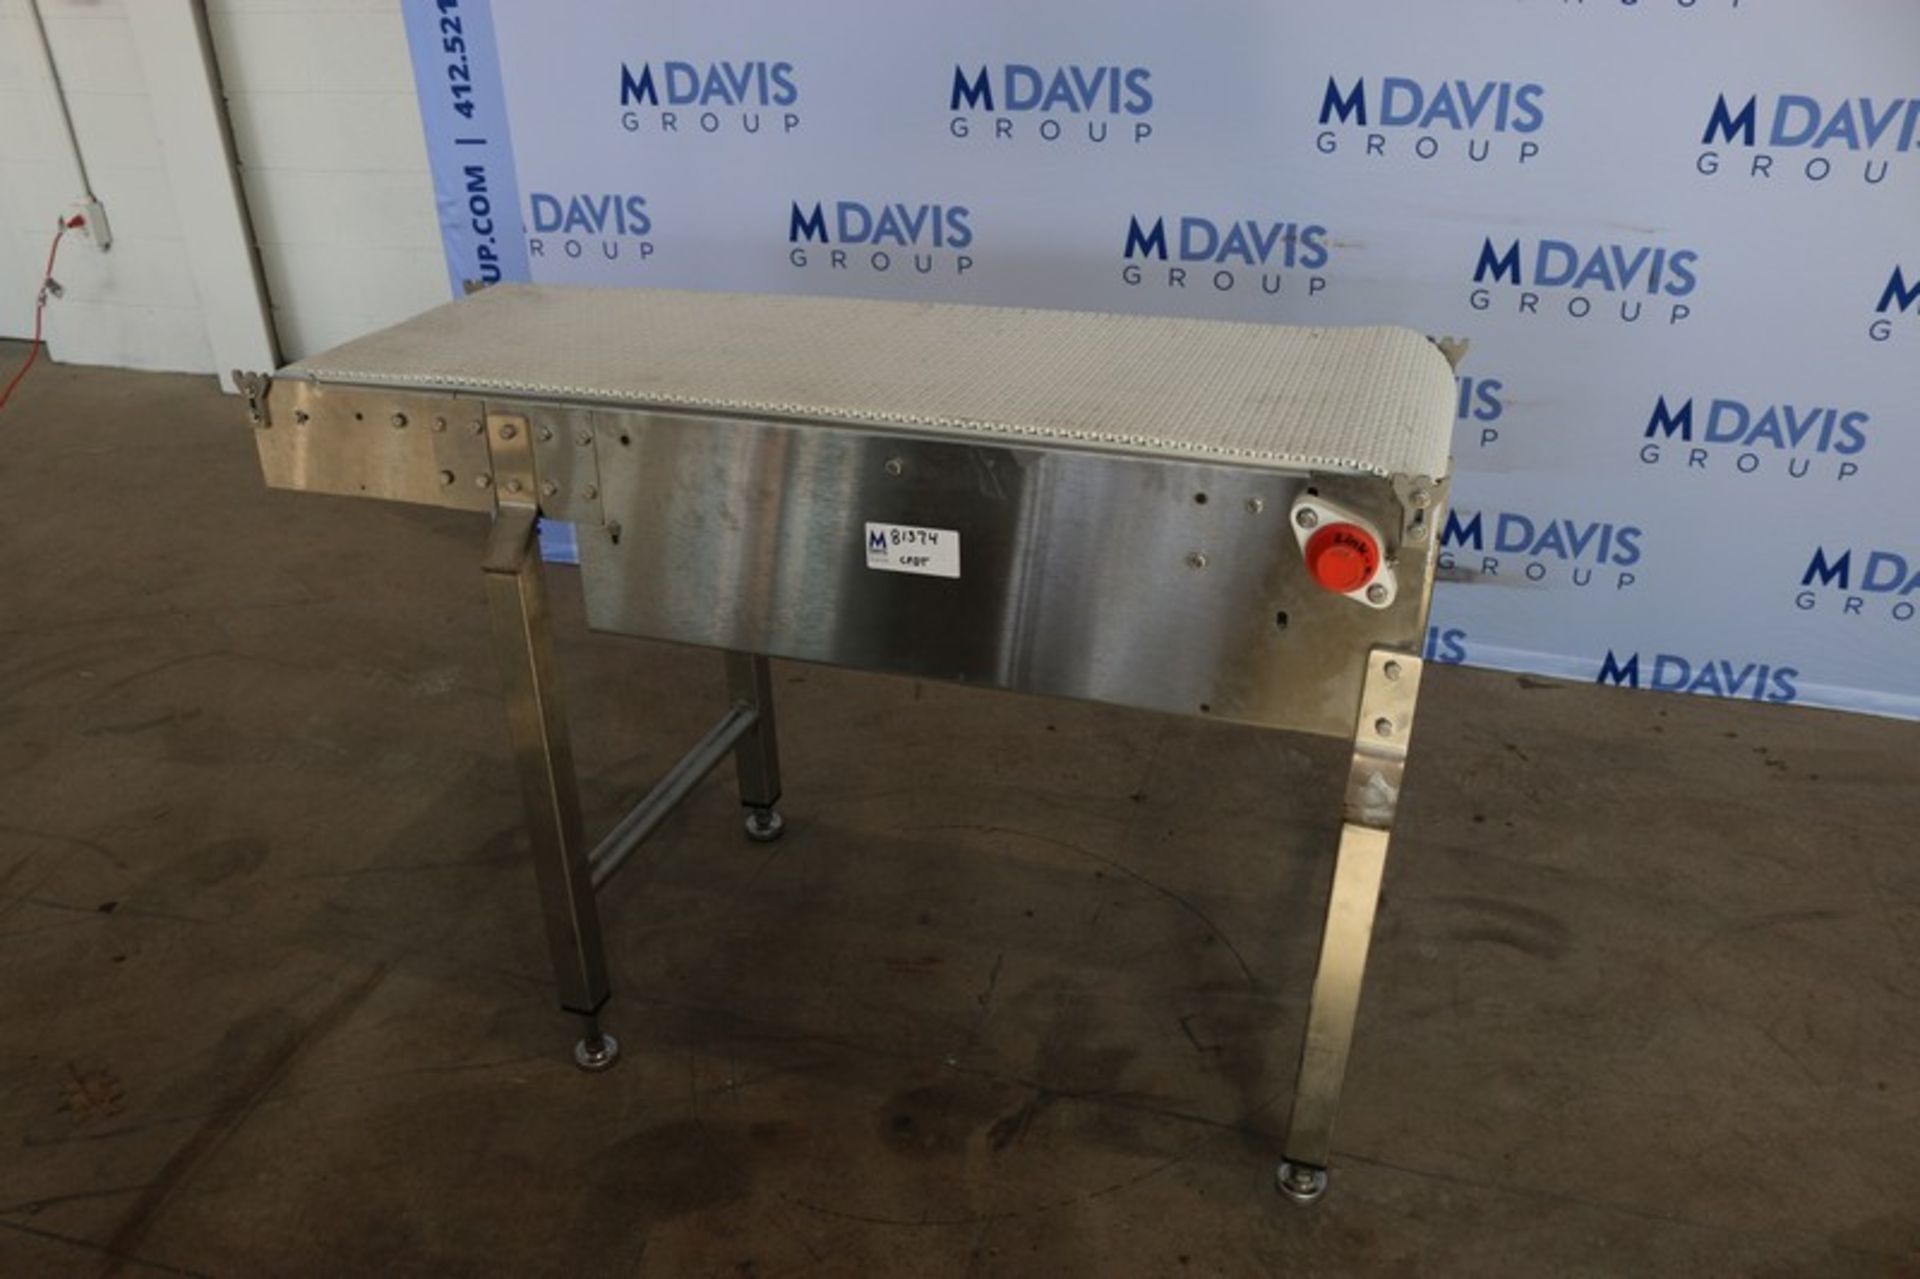 Straight Section of S/S Conveyor, with White Interlock Belt, Aprox. 55" L x 18" H Belt, Mounted on